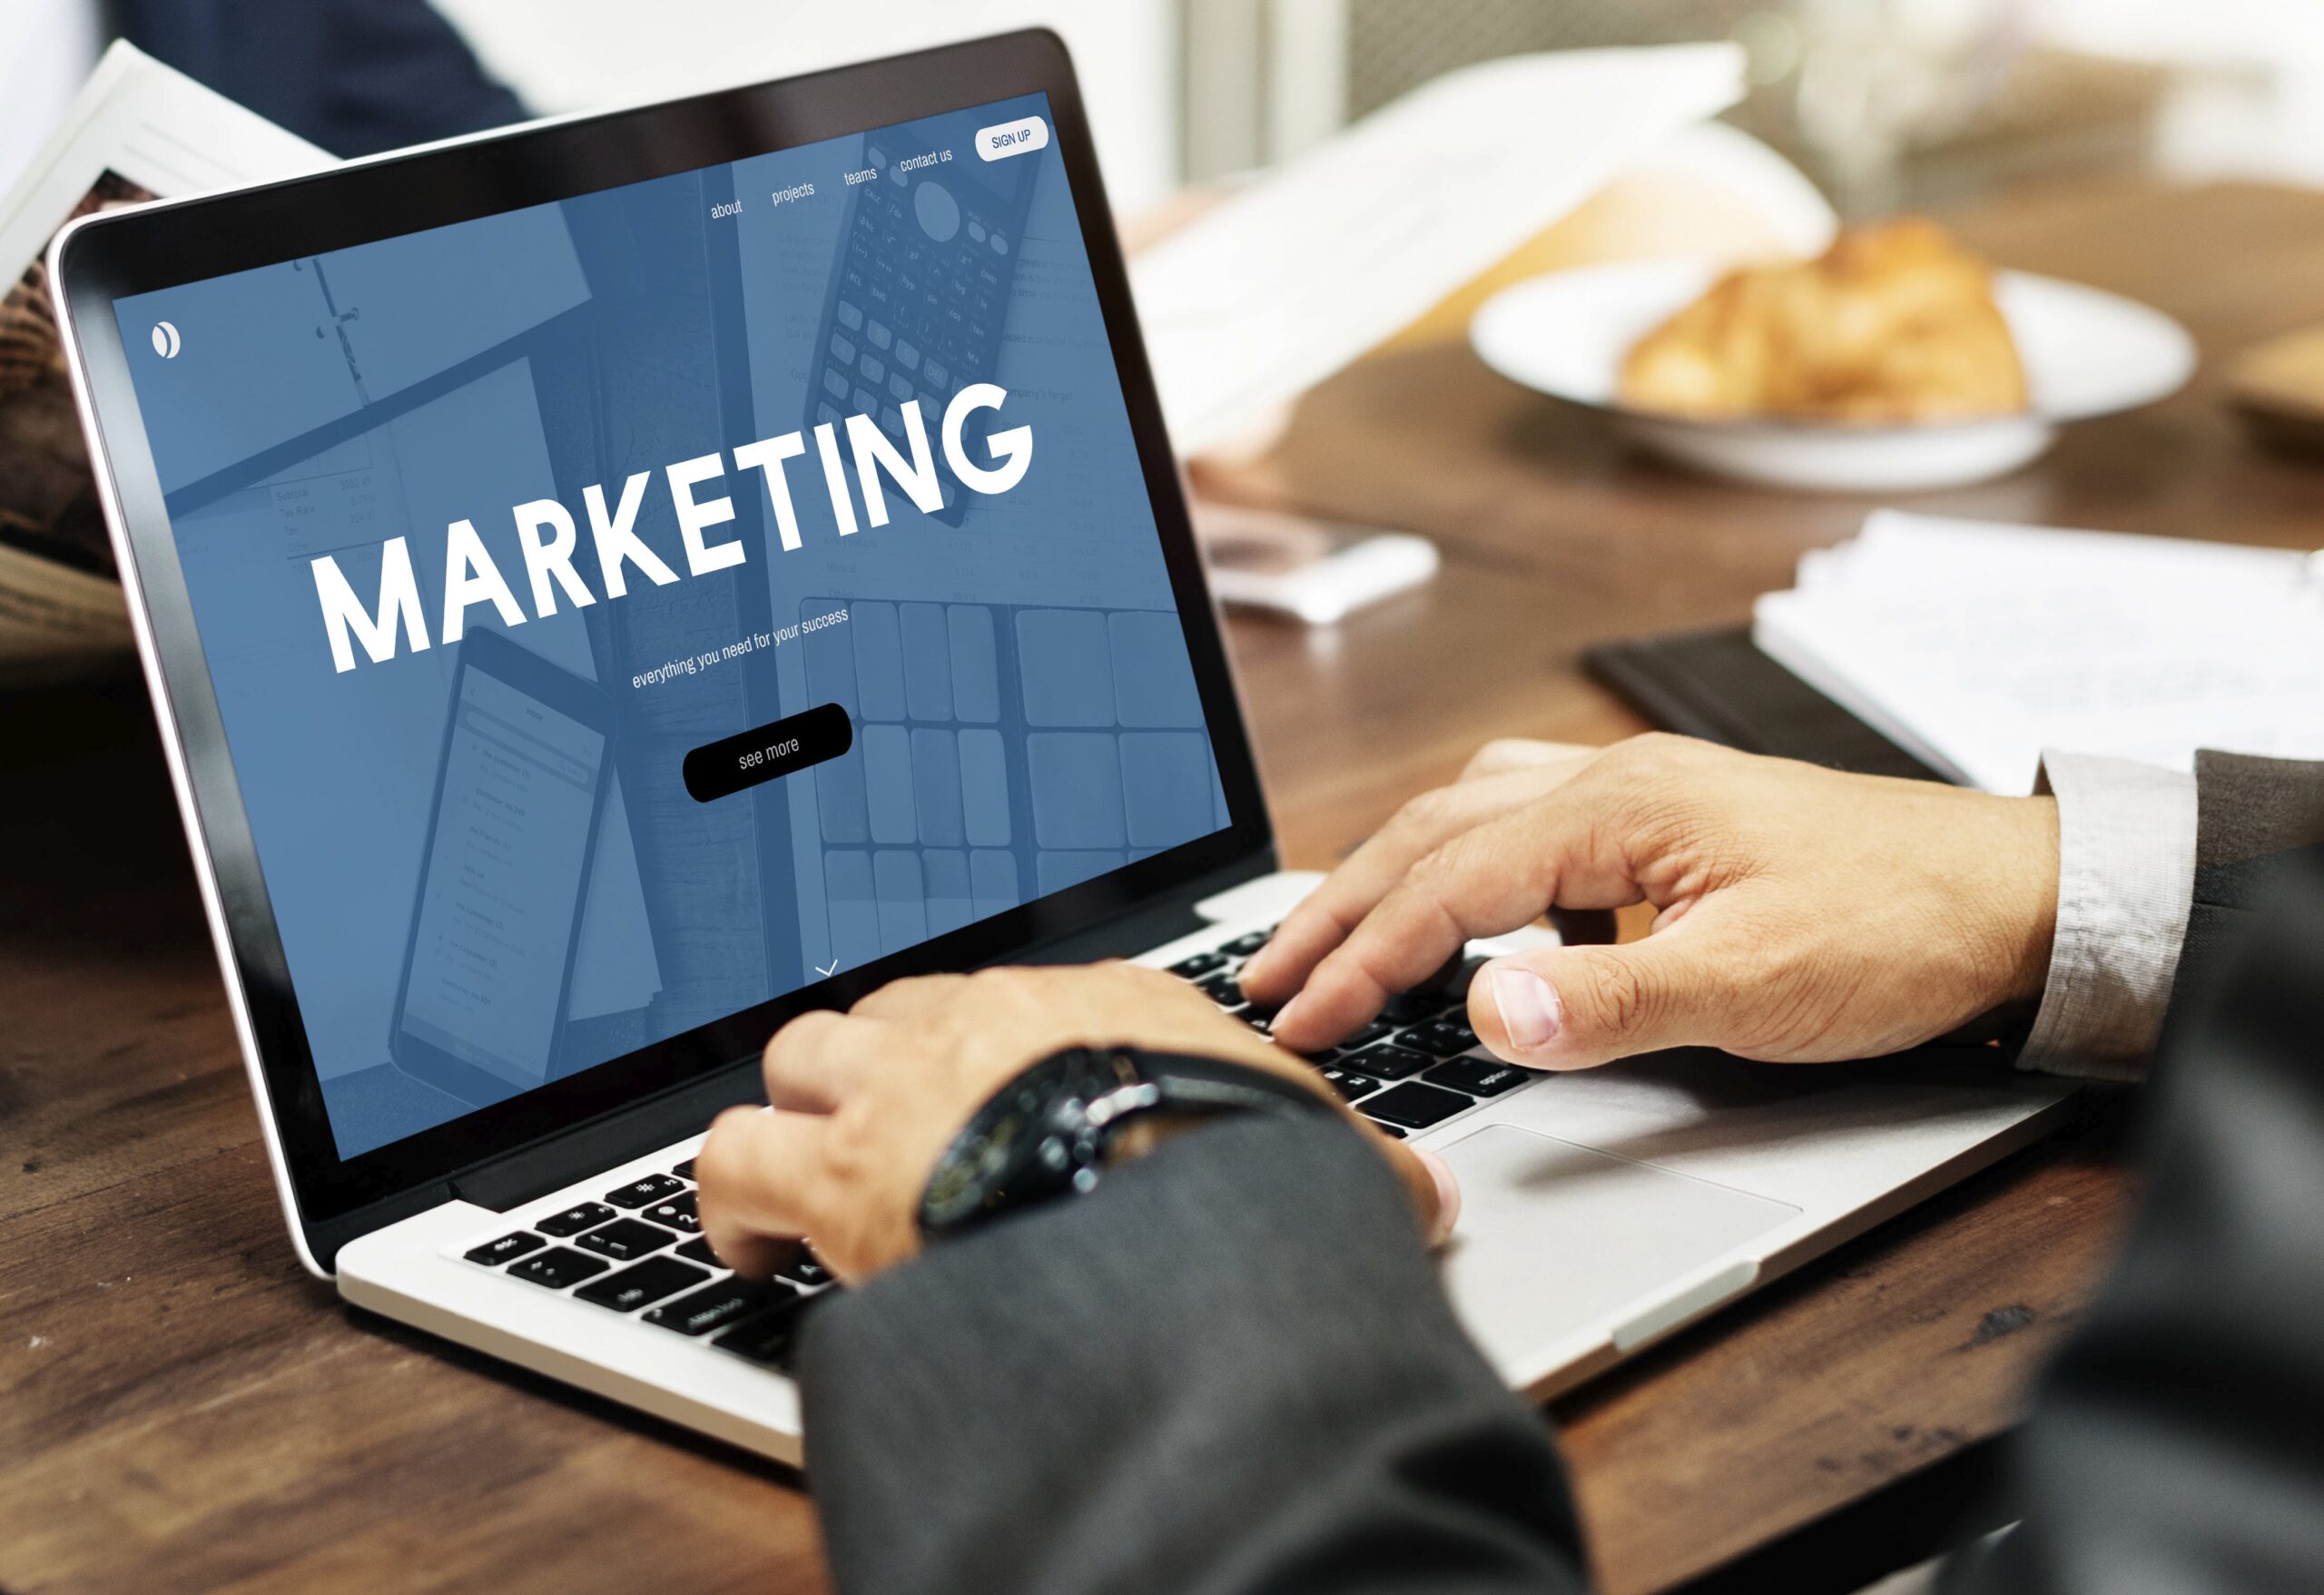 Top 5 Digital Marketing Strategies for your small business in 2021